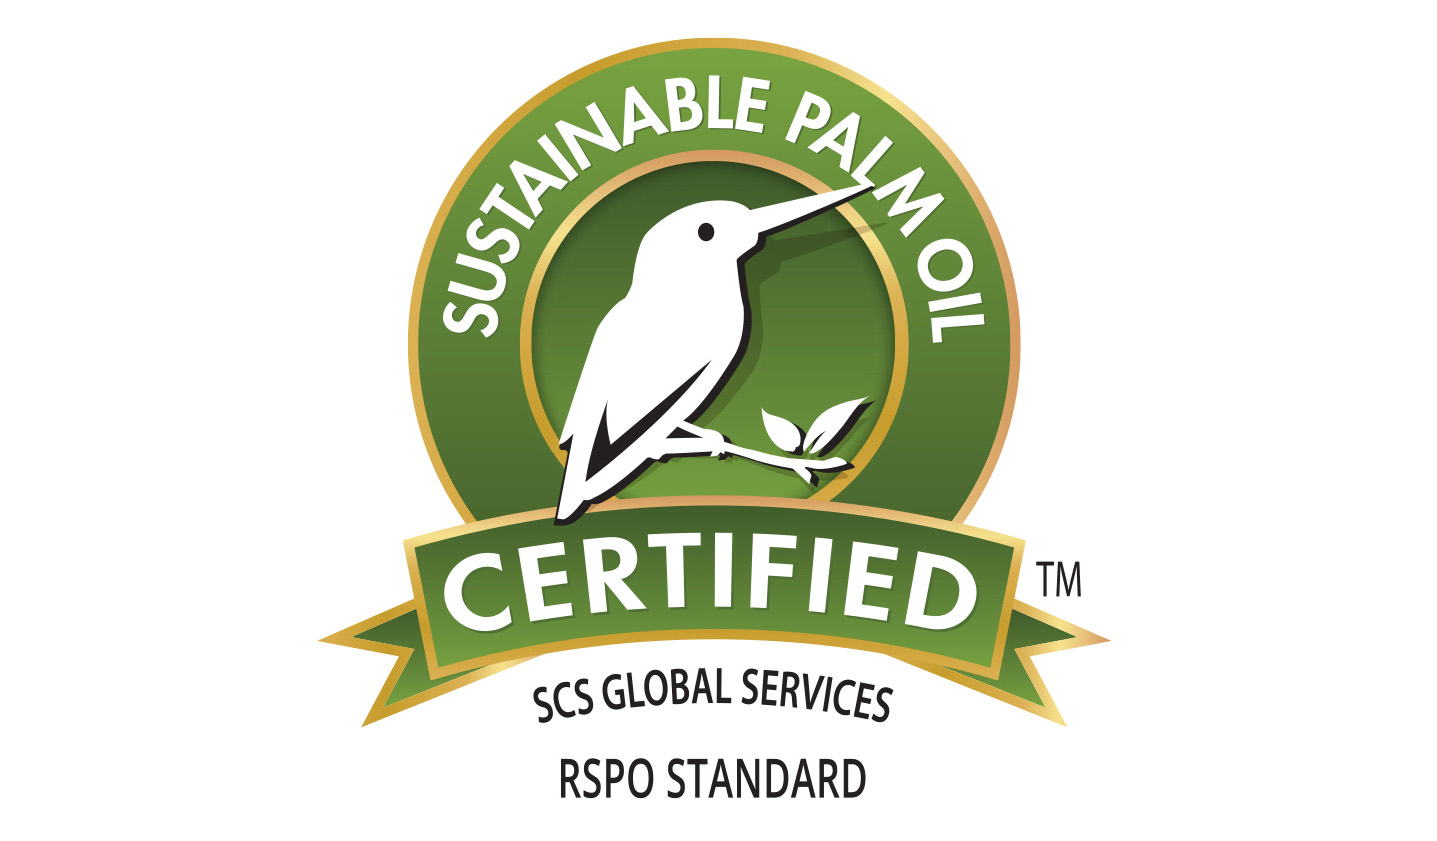 Sustainable palm oil and RSPO certified teaser